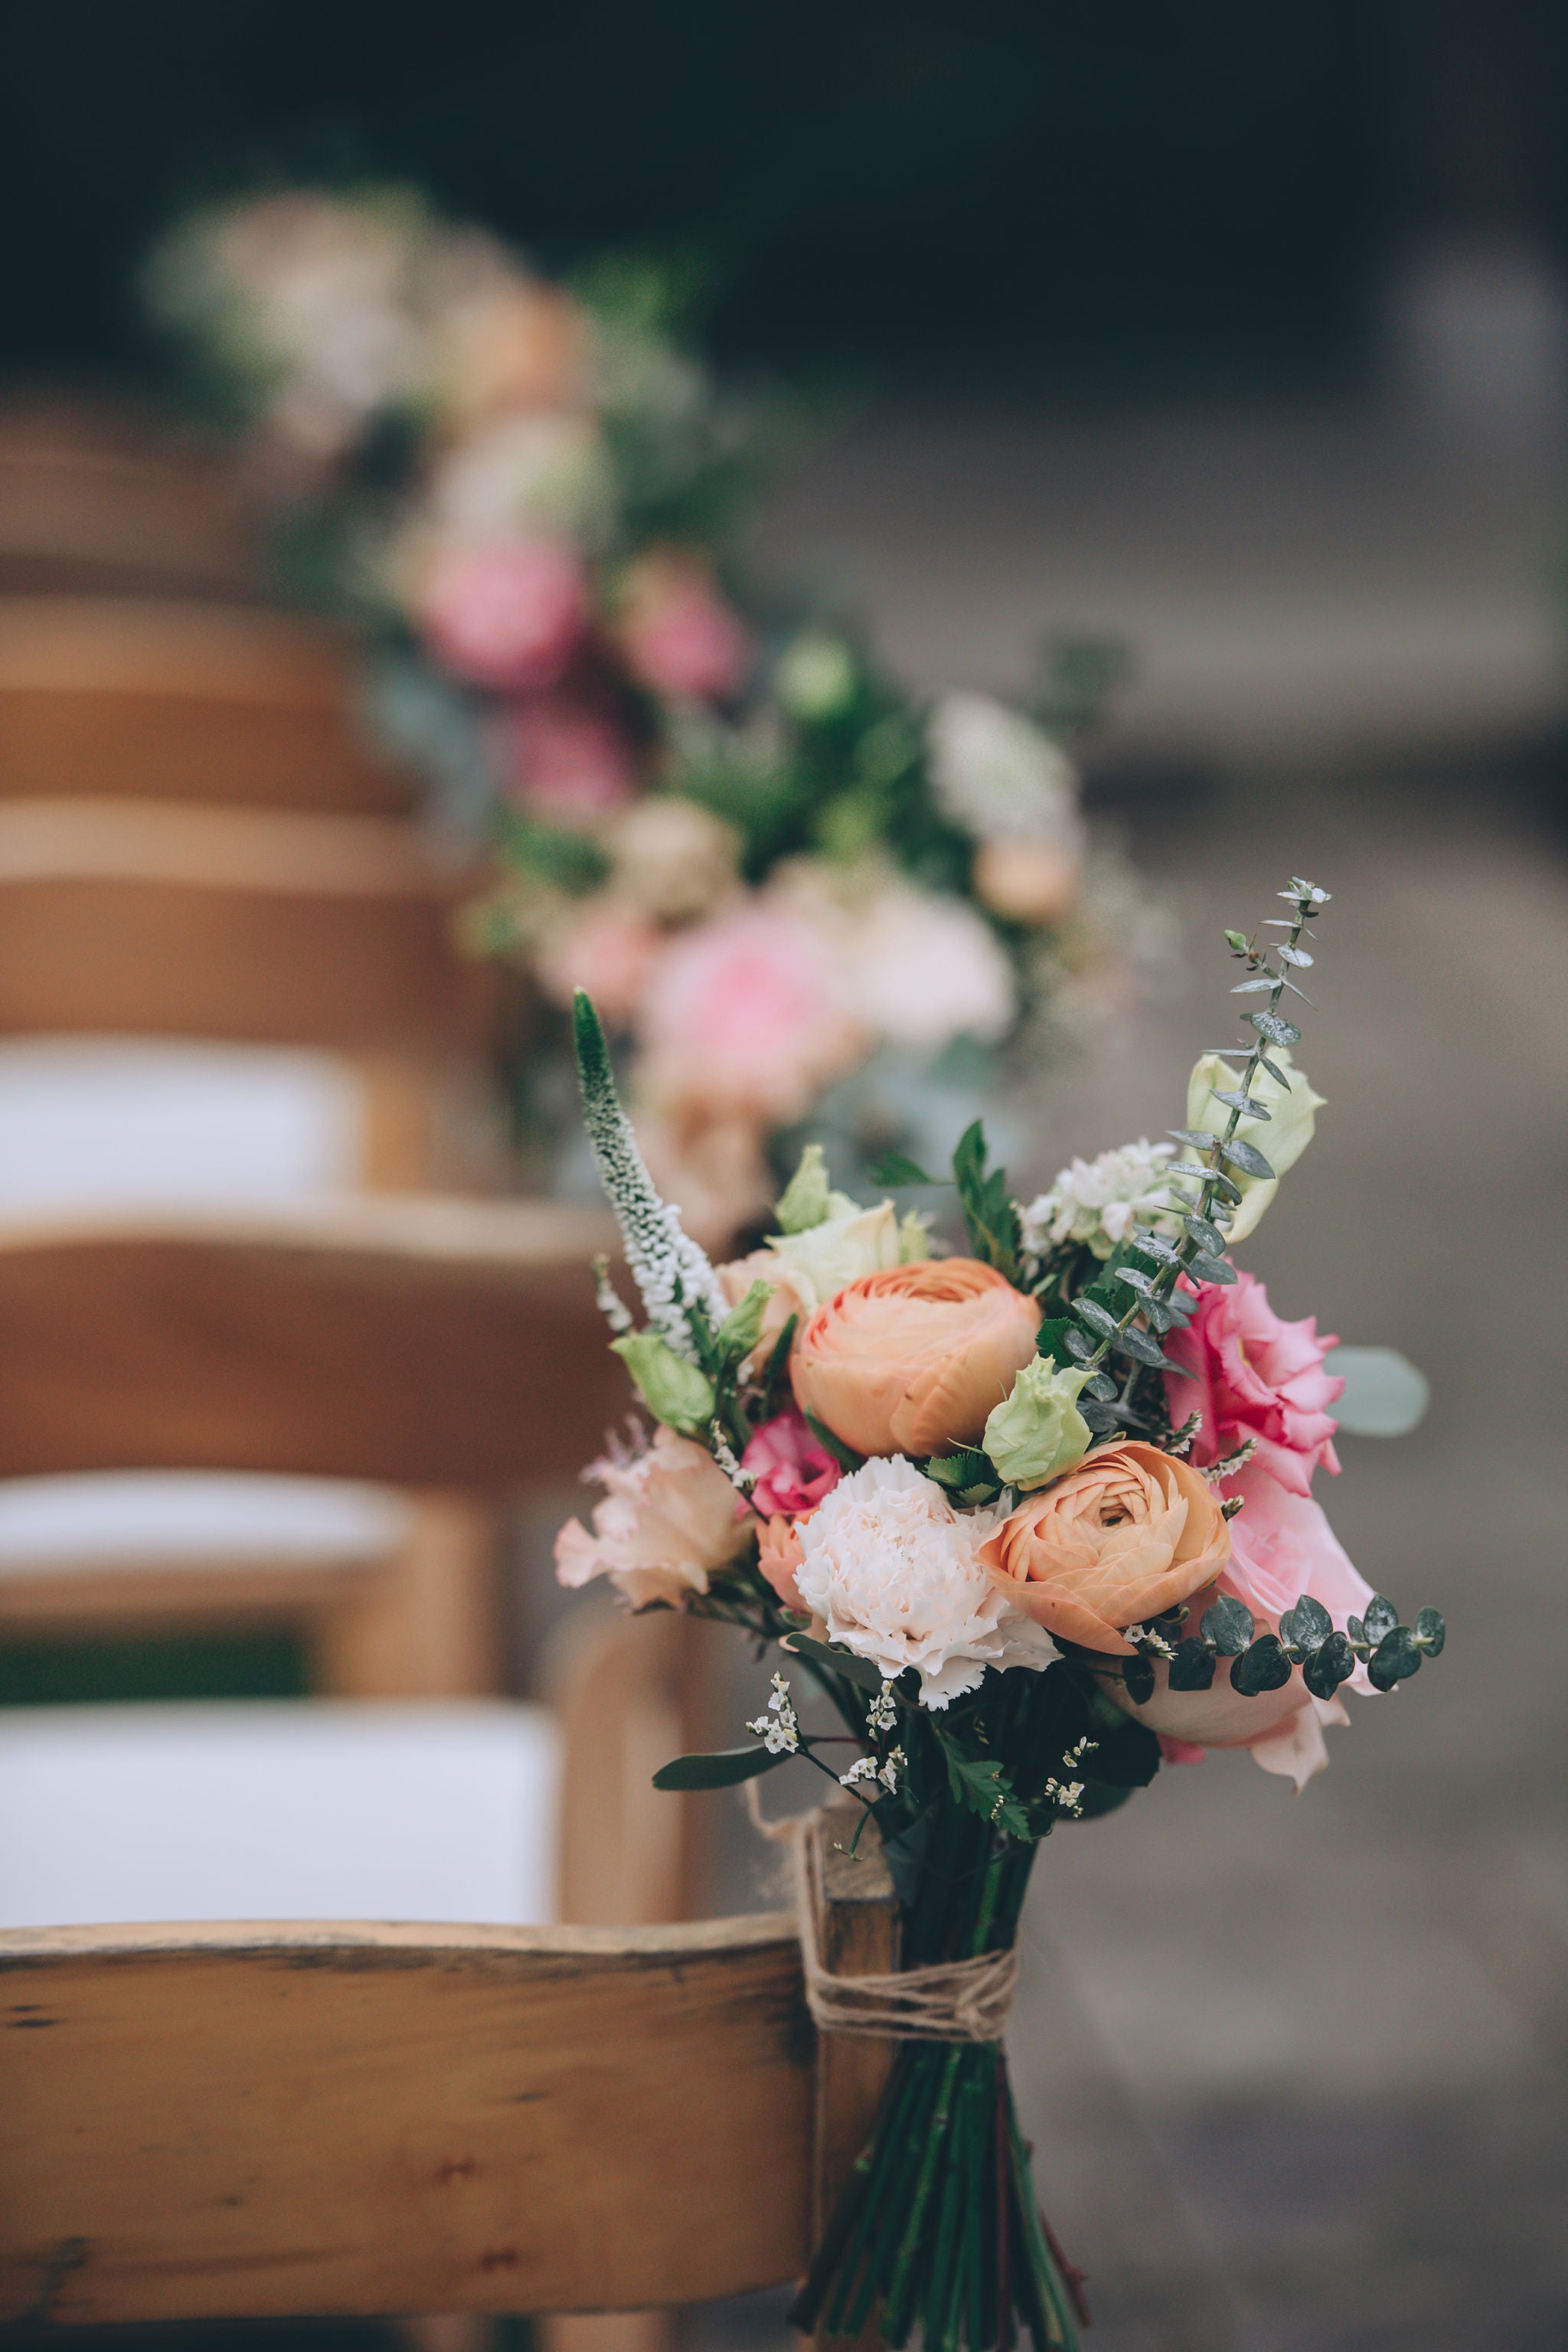 Ceremony chairs with floral ties at Trevenna wedding barns